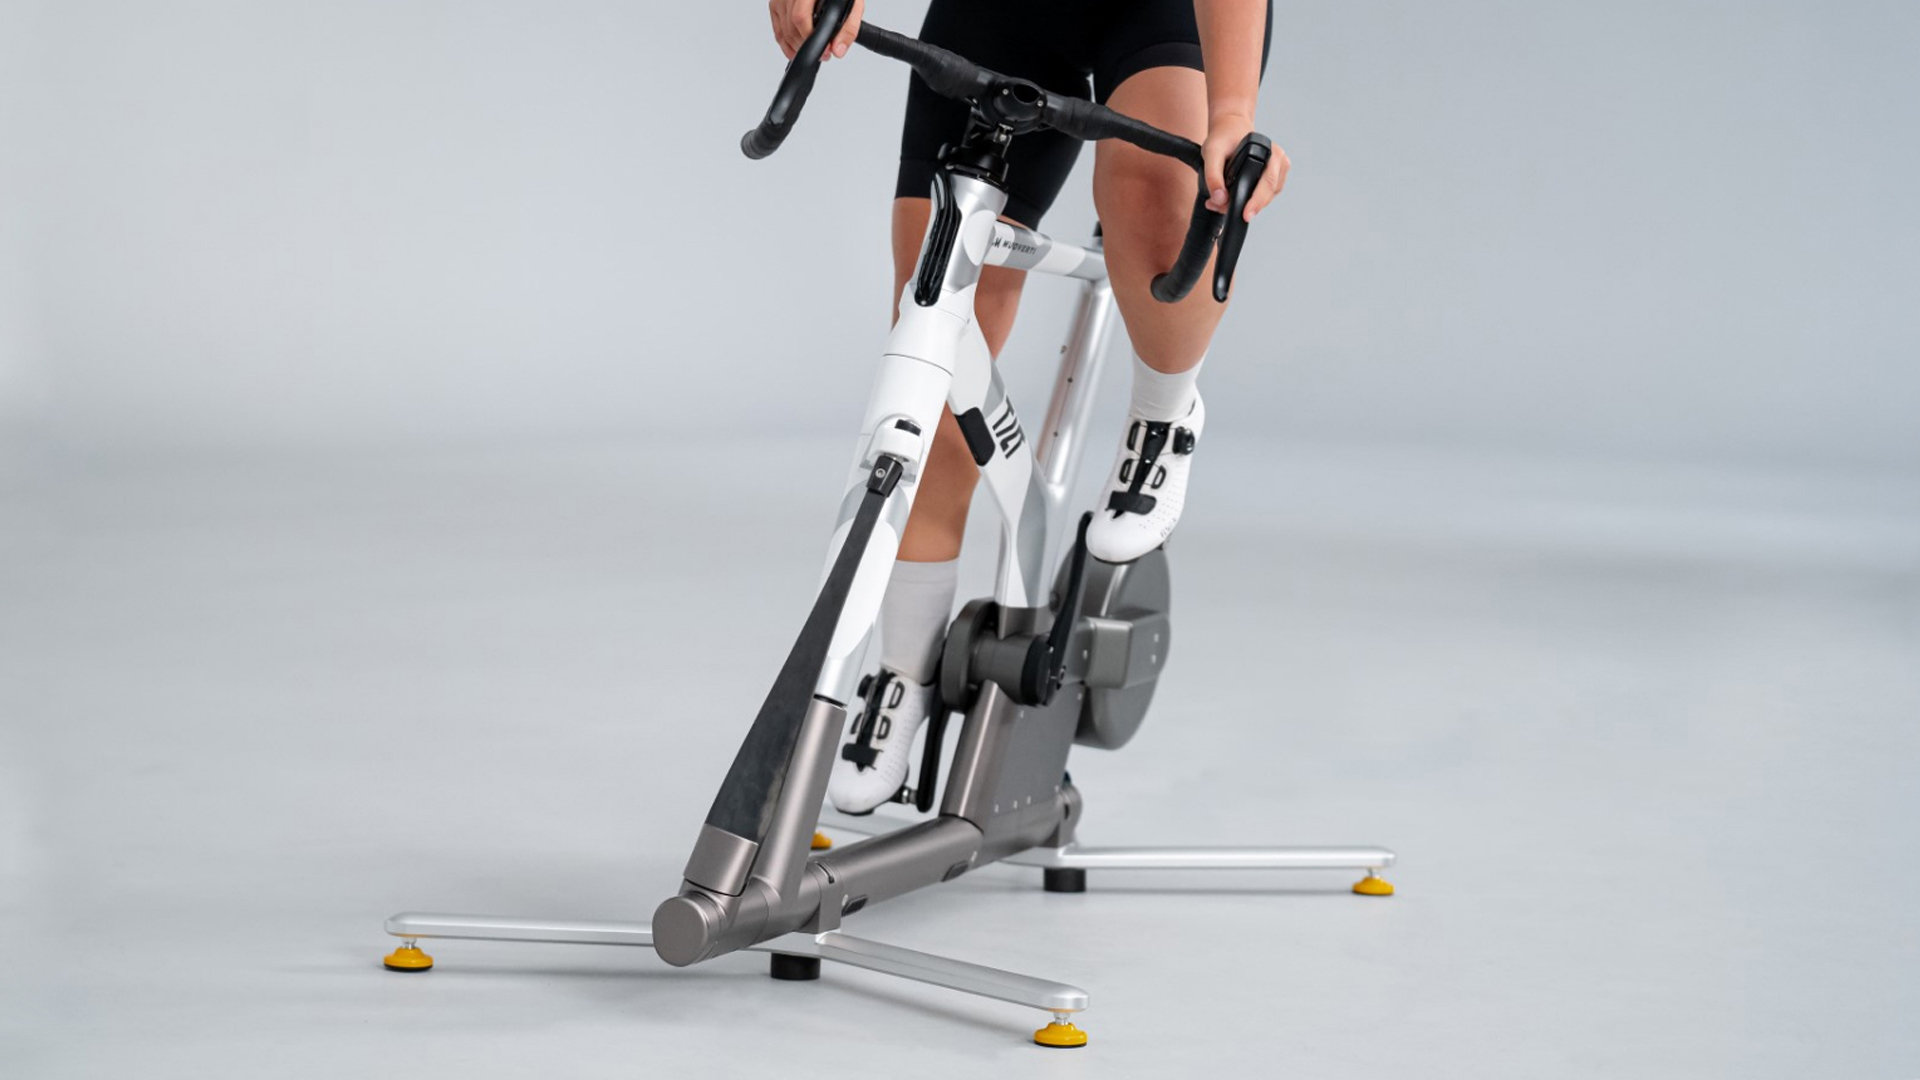 Muoverti’s pioneering Tiltbike delivers next-generation indoor cycling | Signs £500K investment